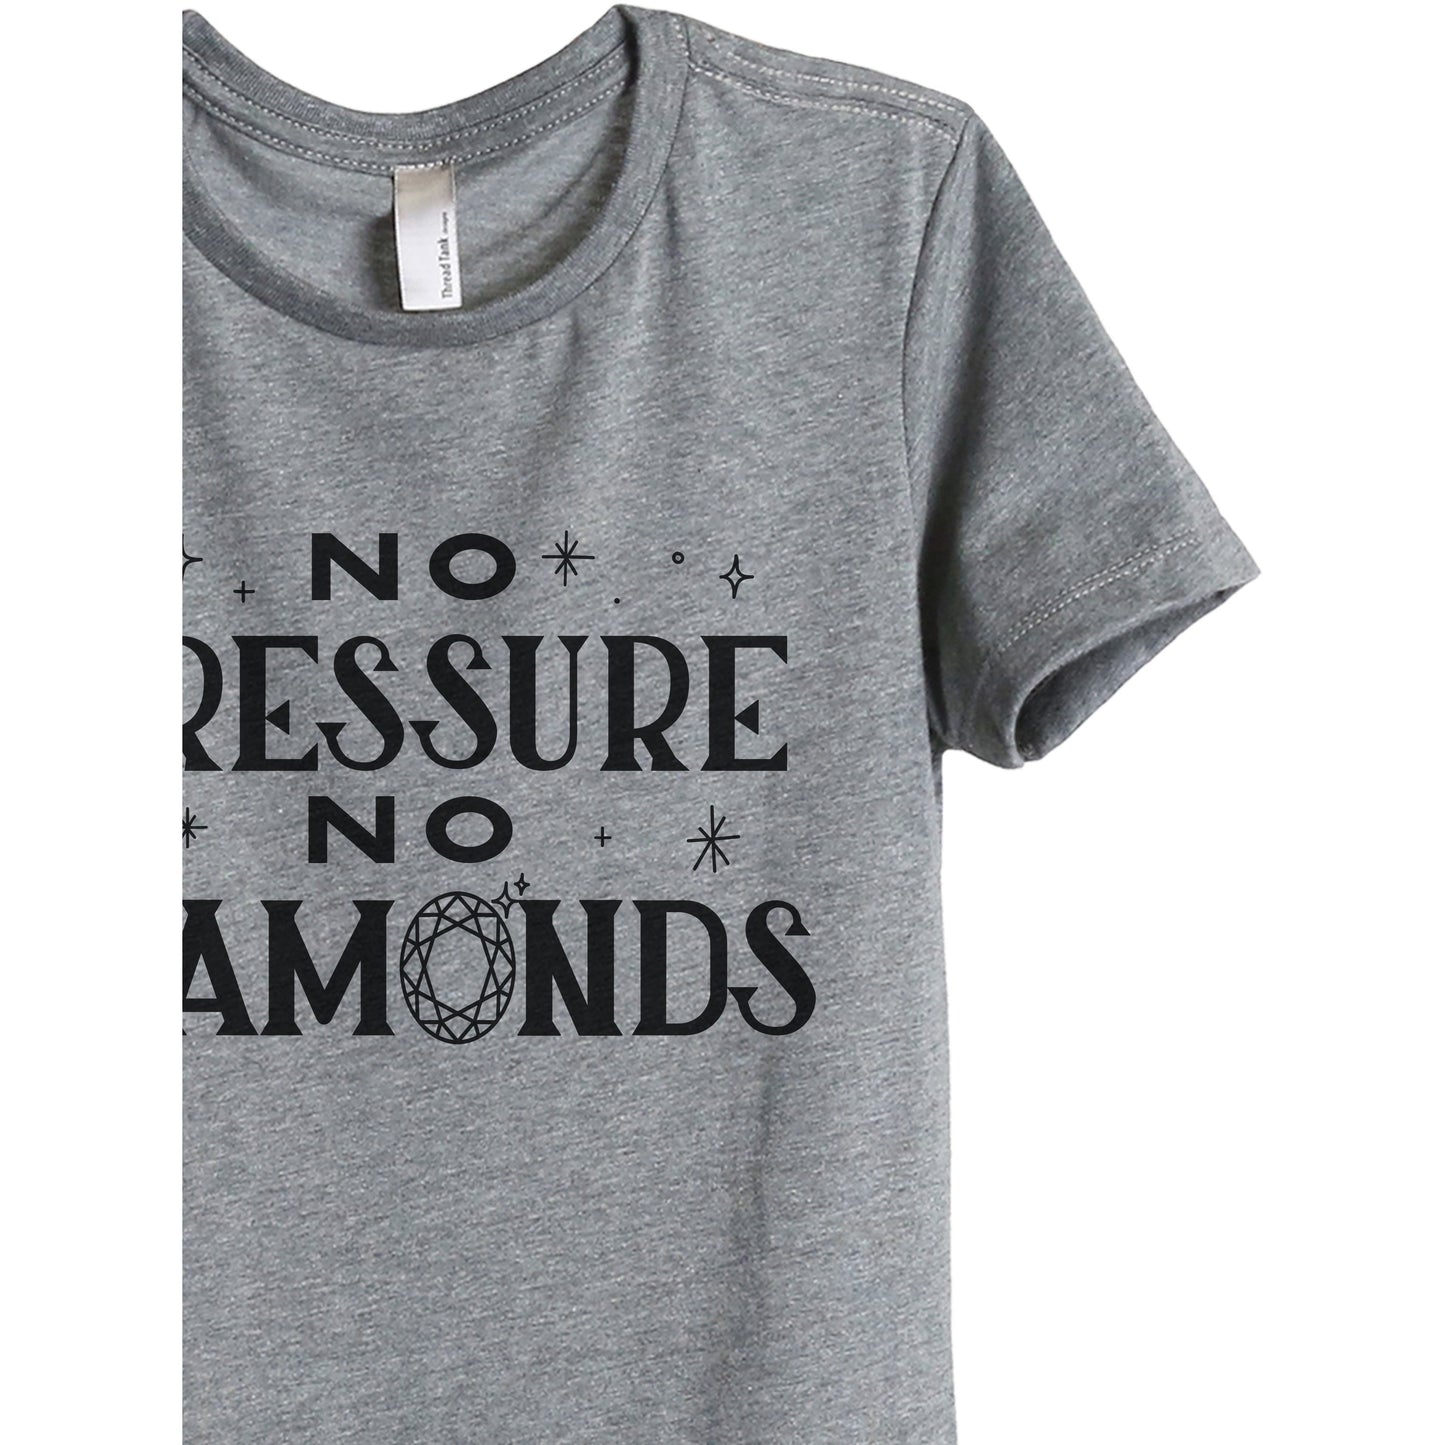 No Pressure. No Diamonds. - Stories You Can Wear by Thread Tank